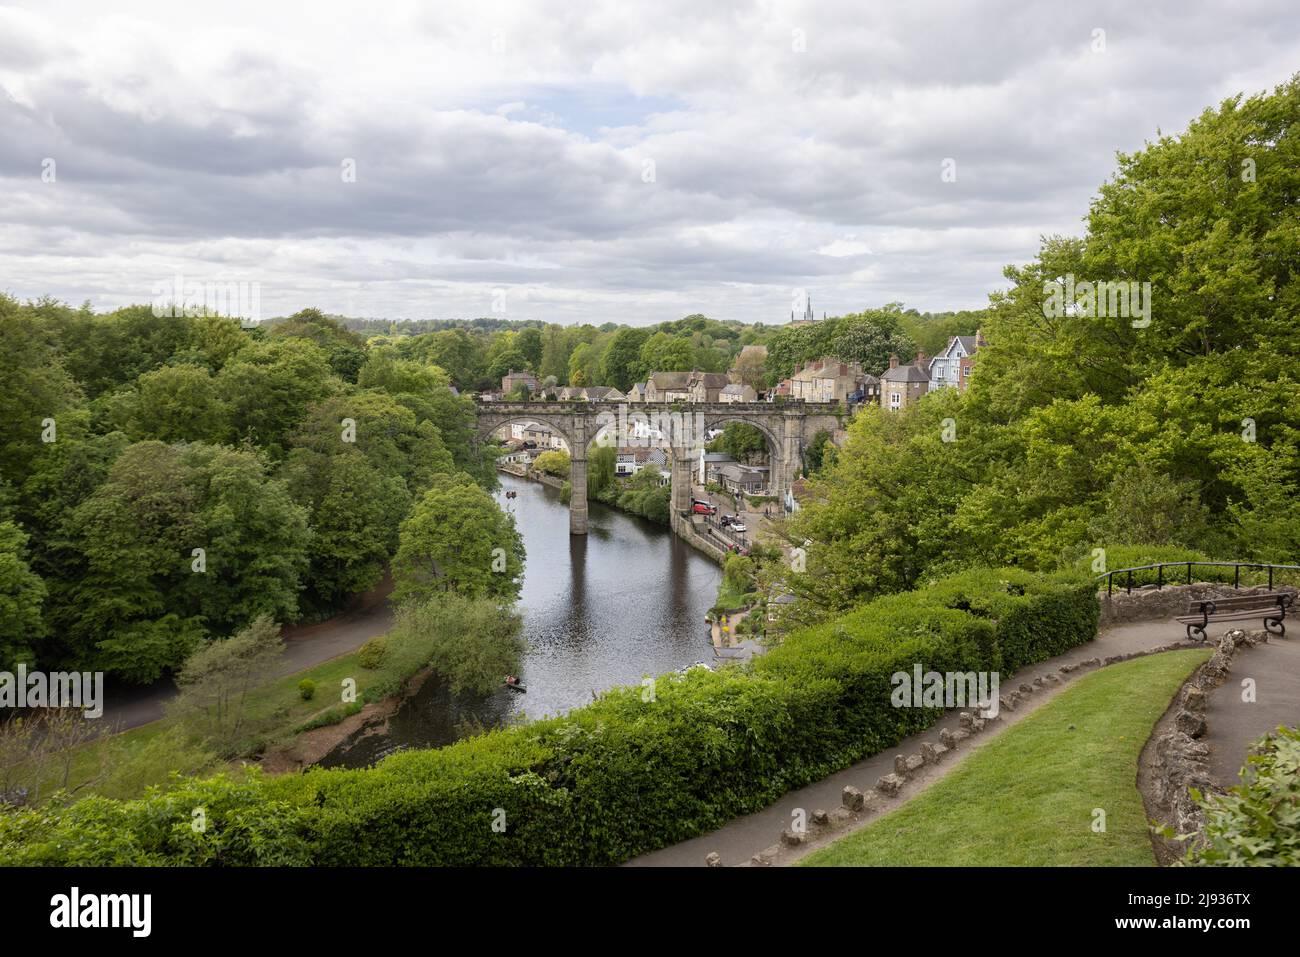 Beautiful view of Knaresborough Viaduct and trees seen from above over the River Nidd in the town of Knaresborough in Yorkshire, UK Stock Photo